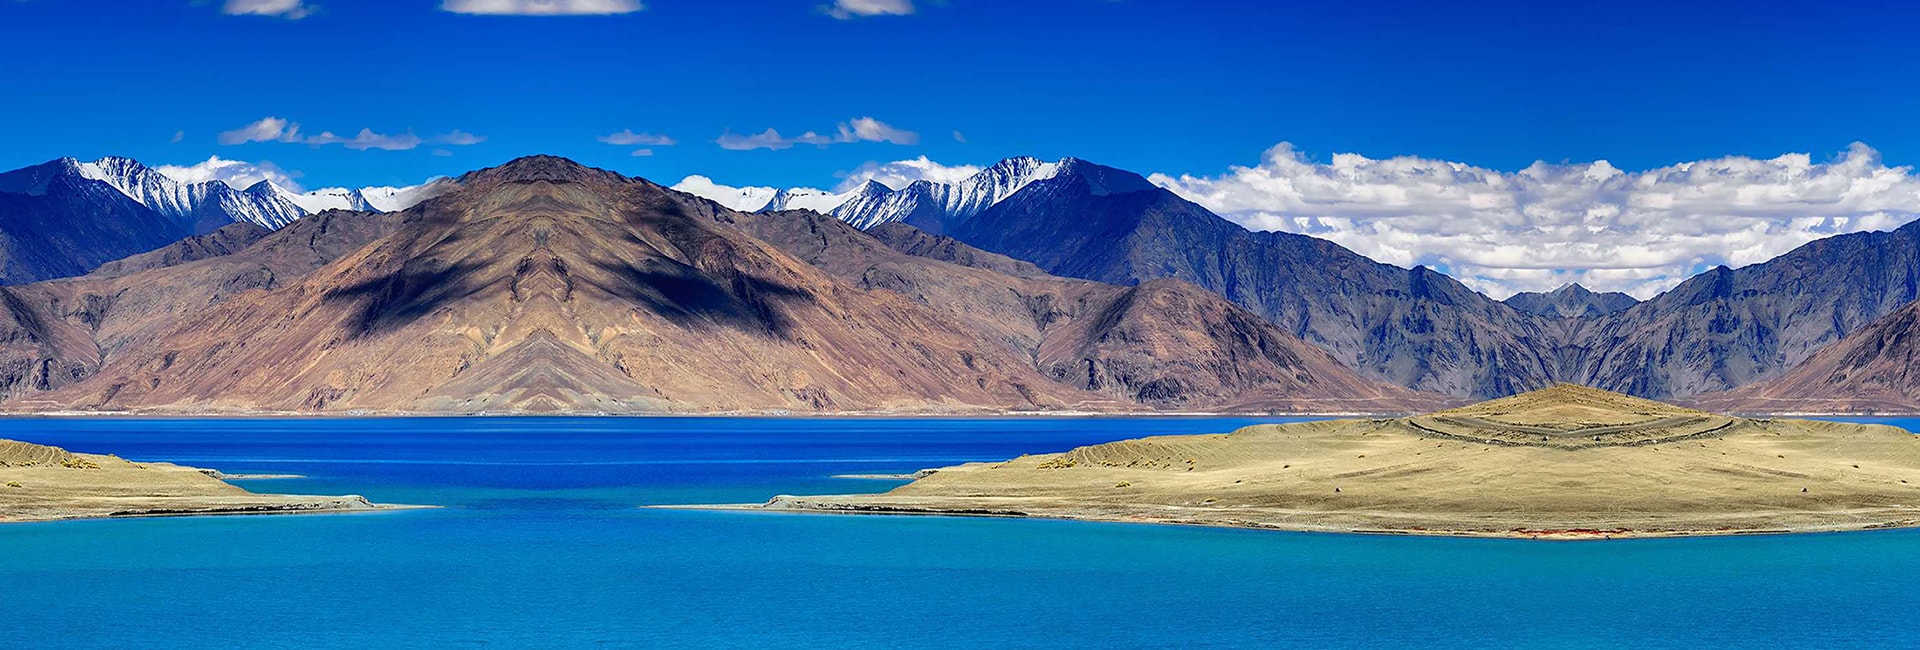 5 Naturally Beautiful Places In India